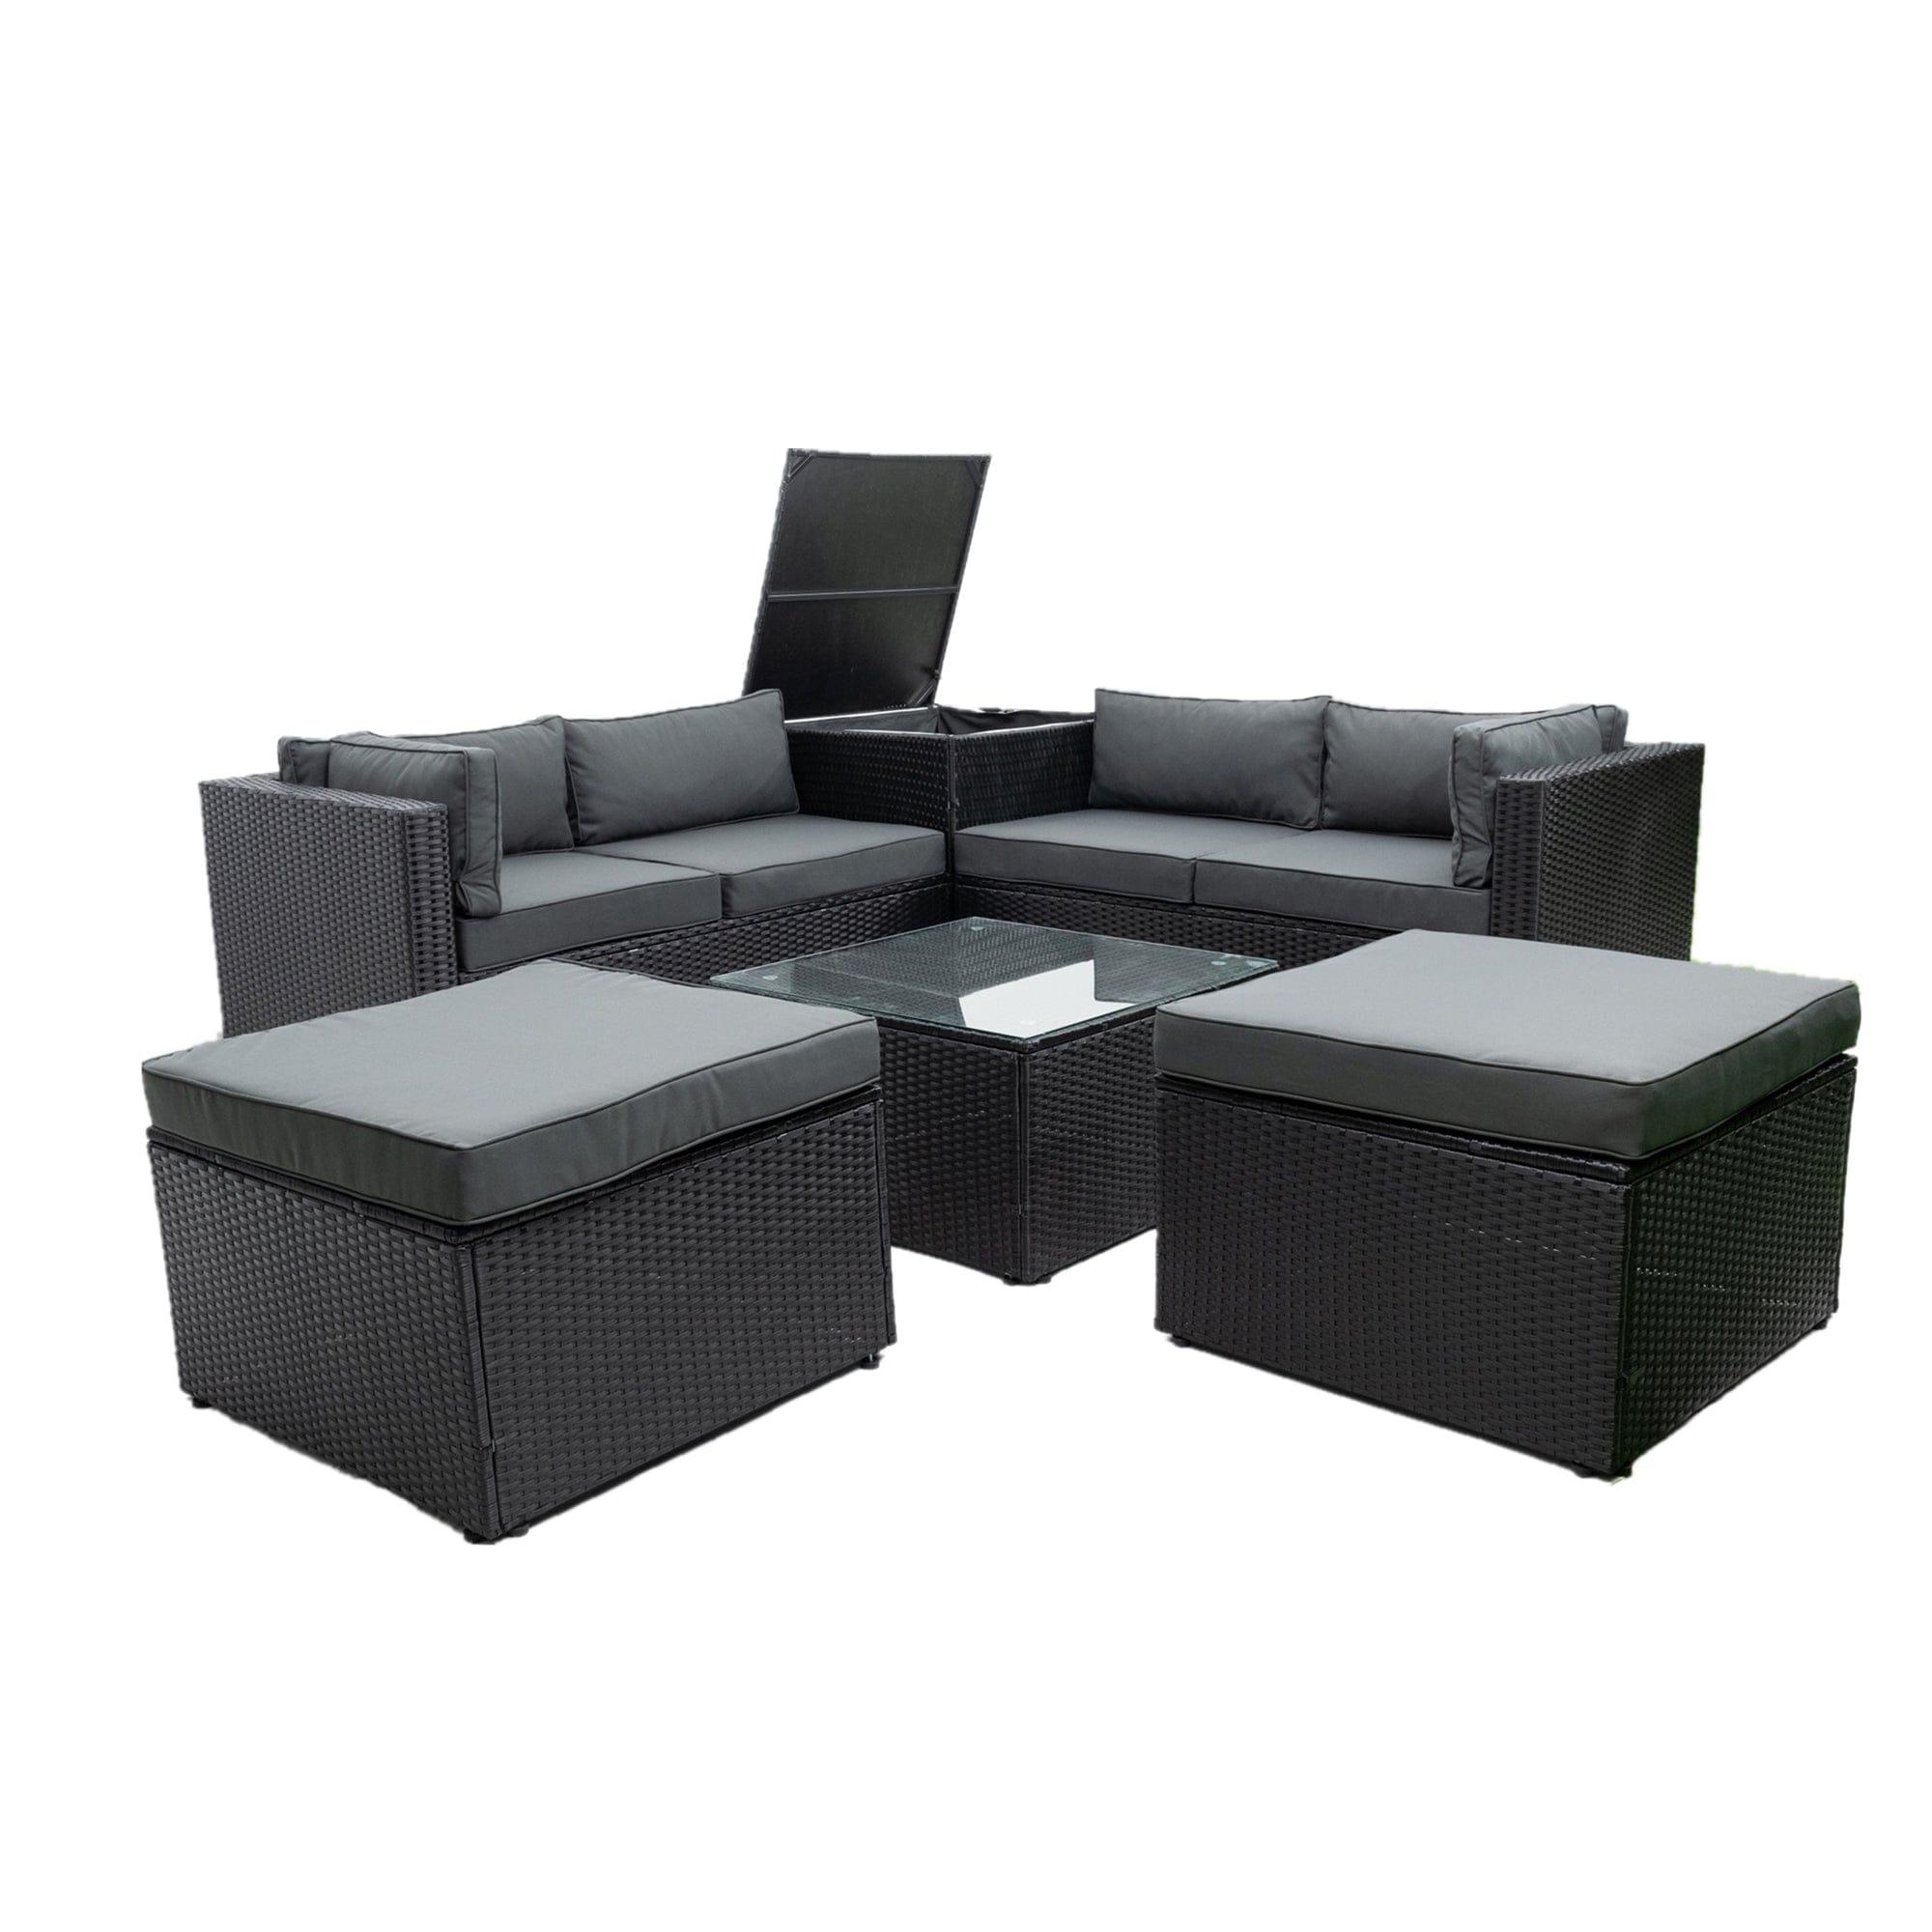 Shop 6 Piece Patio Rattan Wicker Outdoor Furniture Conversation Sofa Set with Storage Box Removeable Cushions and Temper glass TableTop Mademoiselle Home Decor